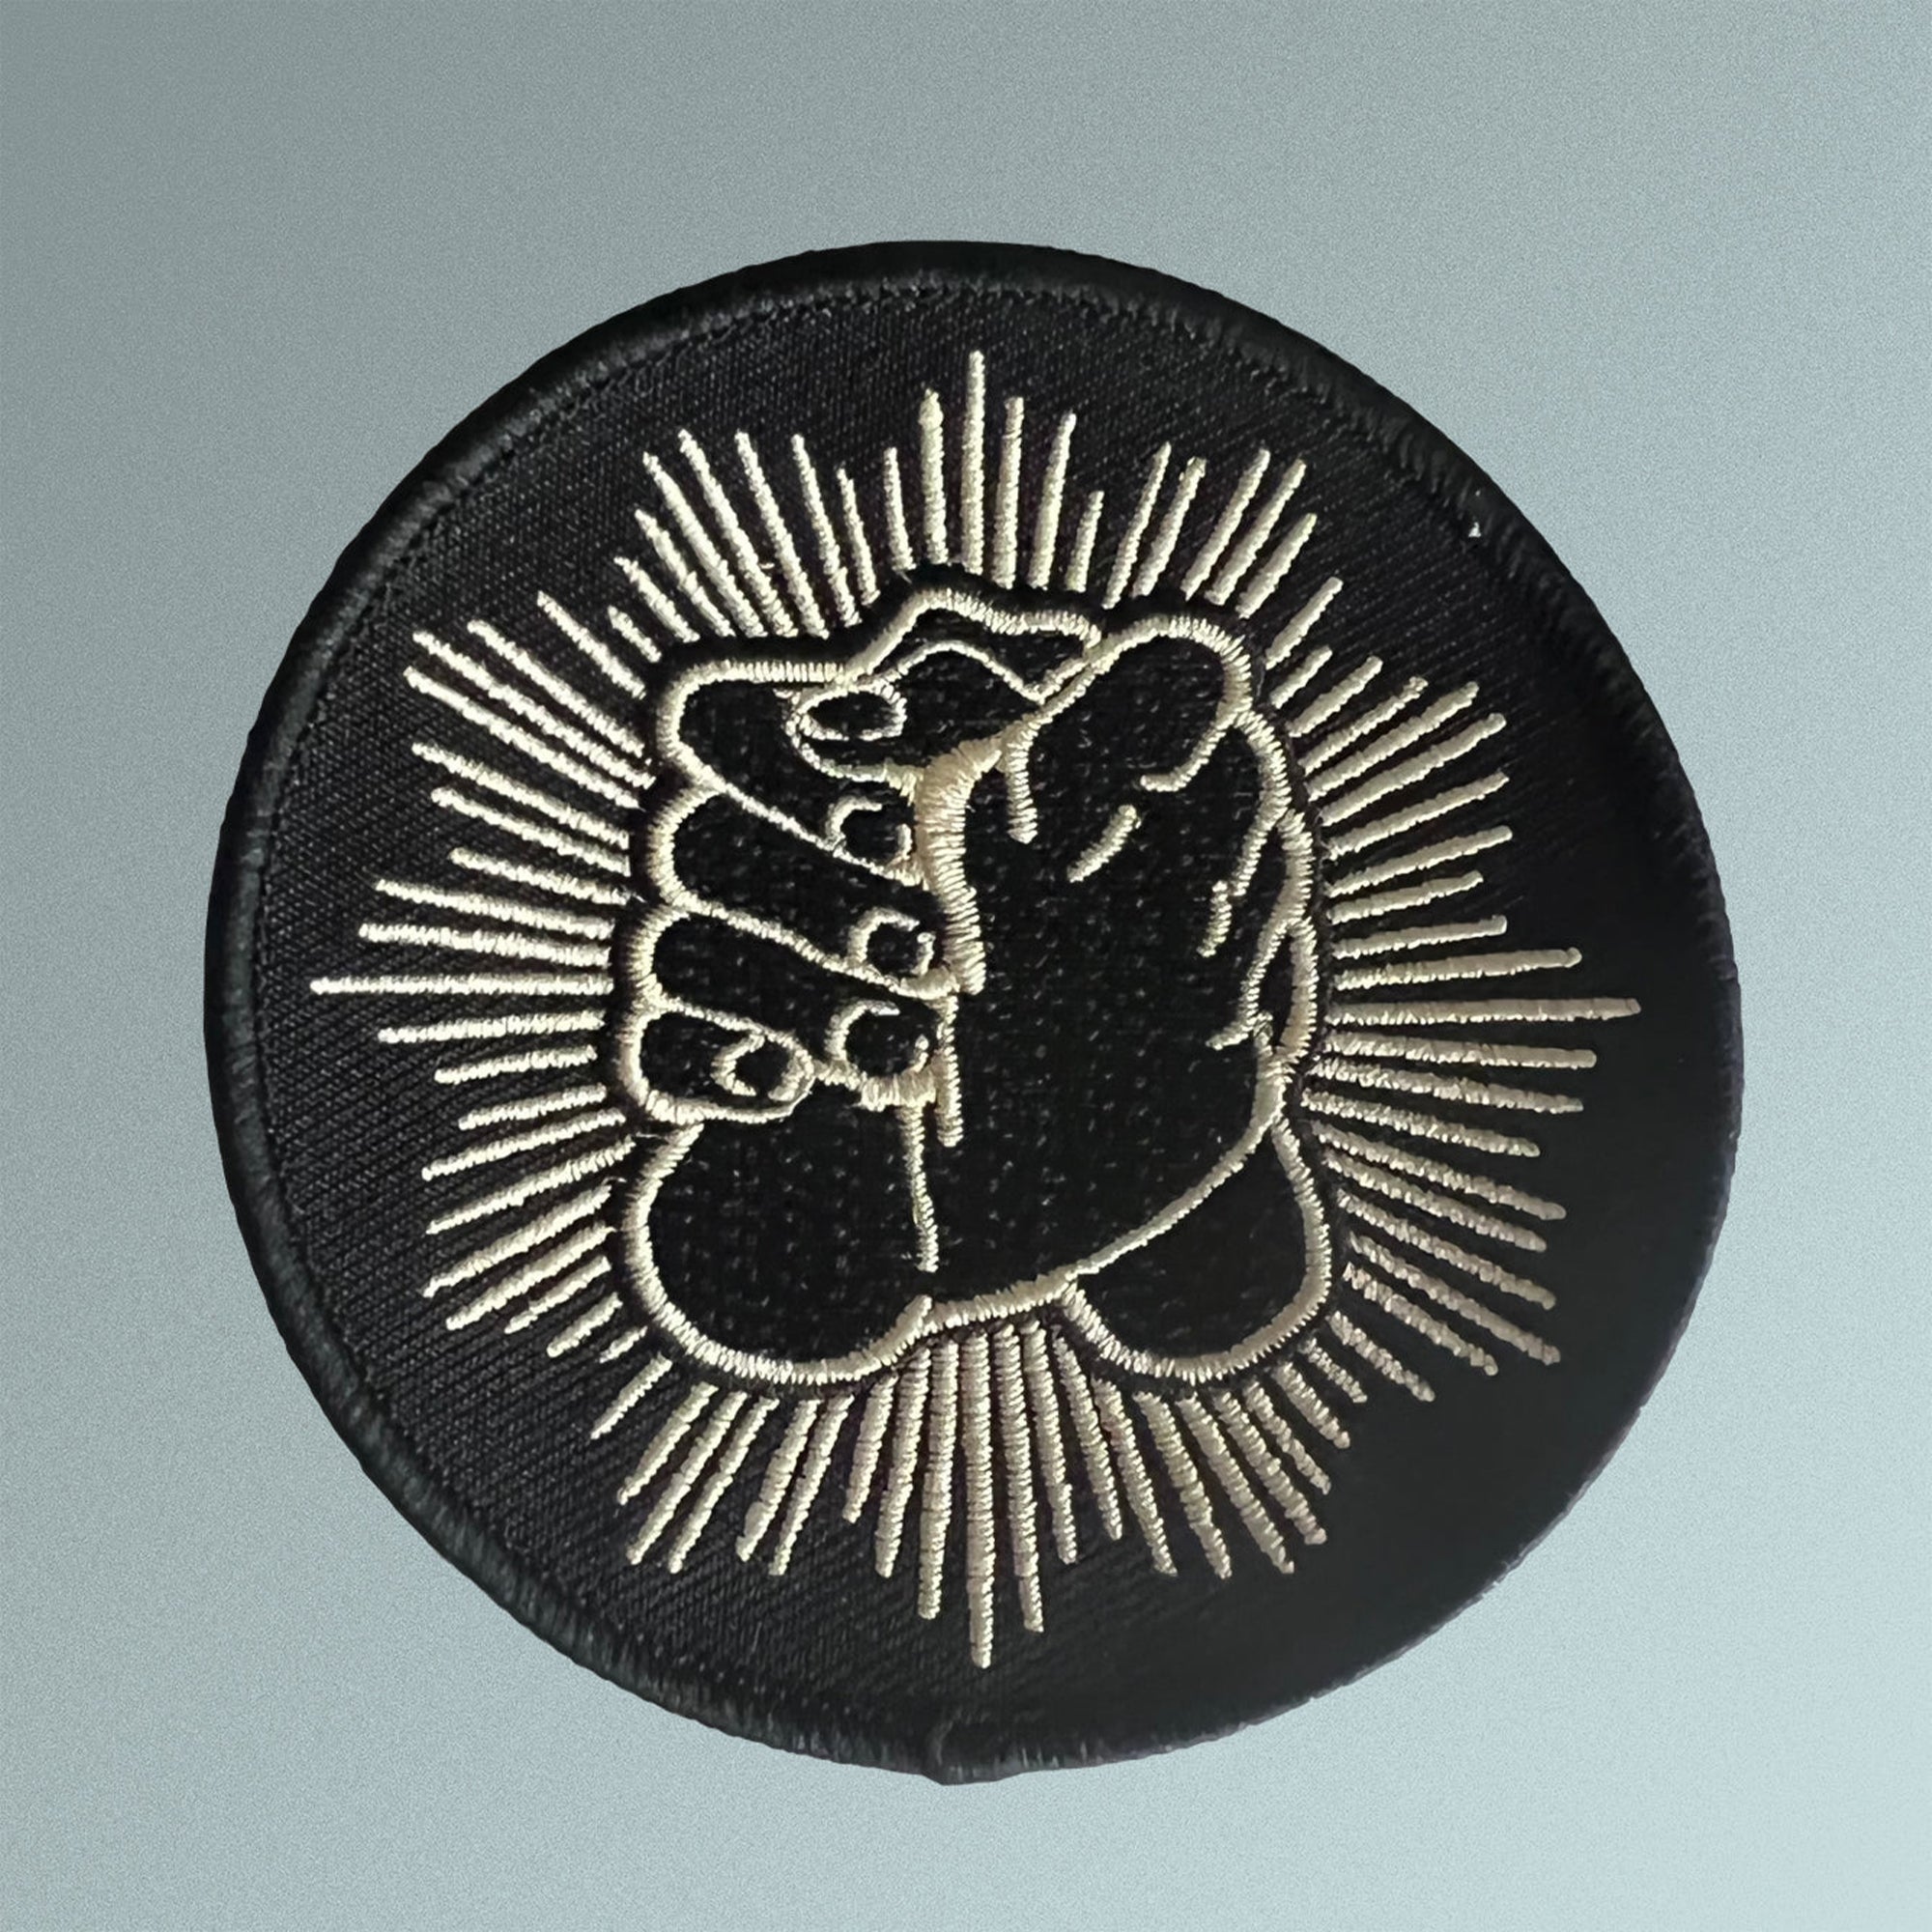 Blood Pact Patch